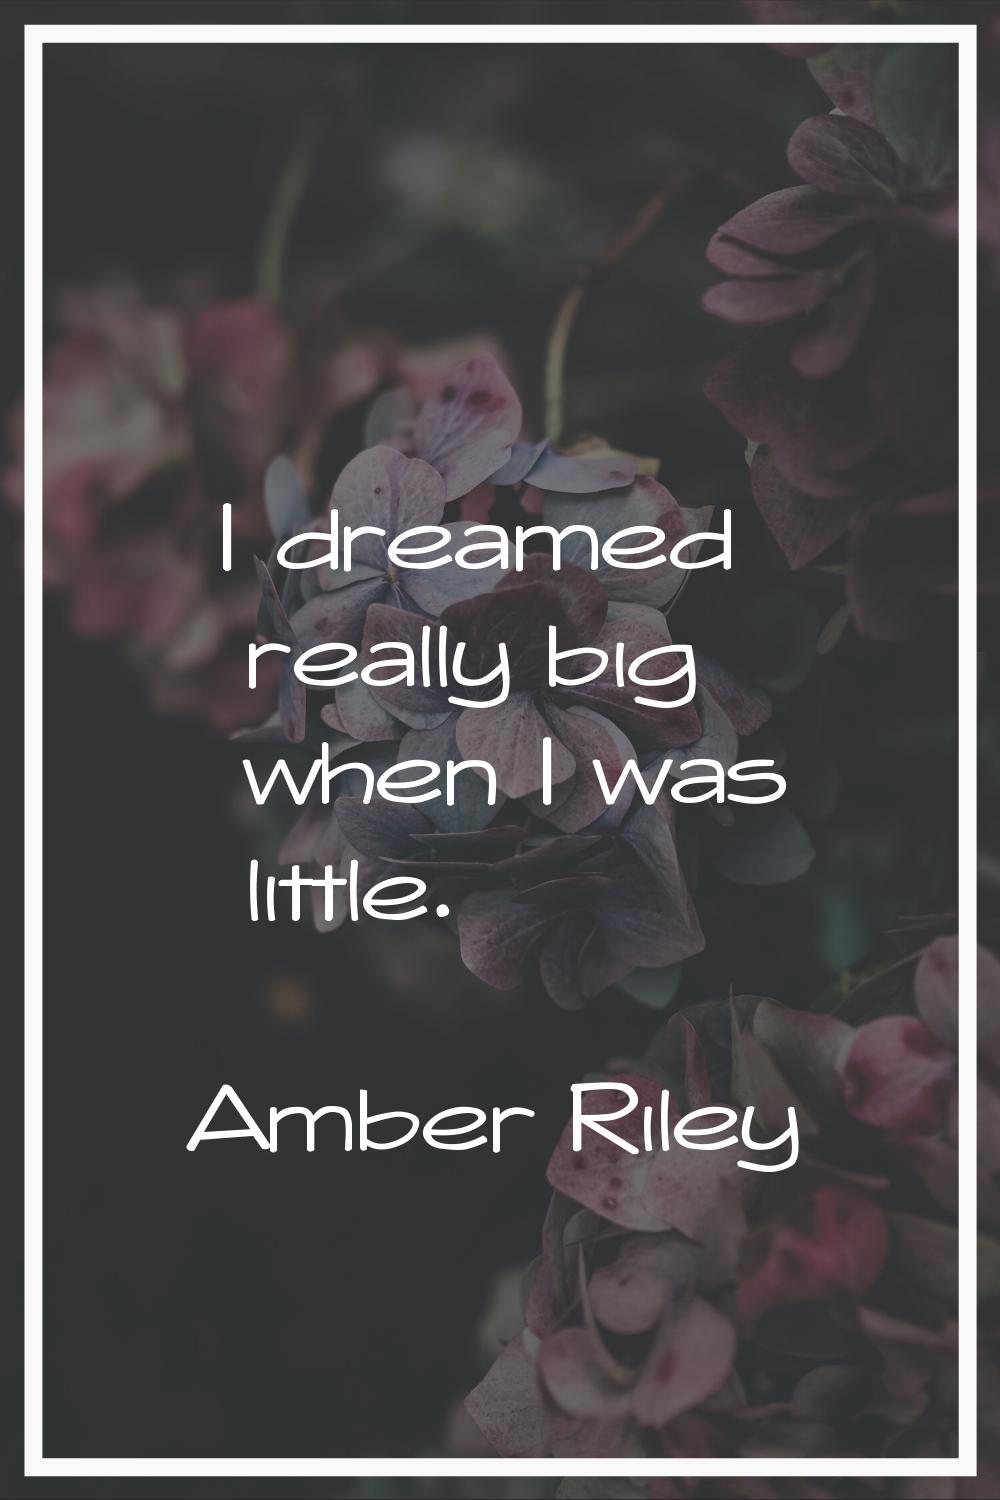 I dreamed really big when I was little.